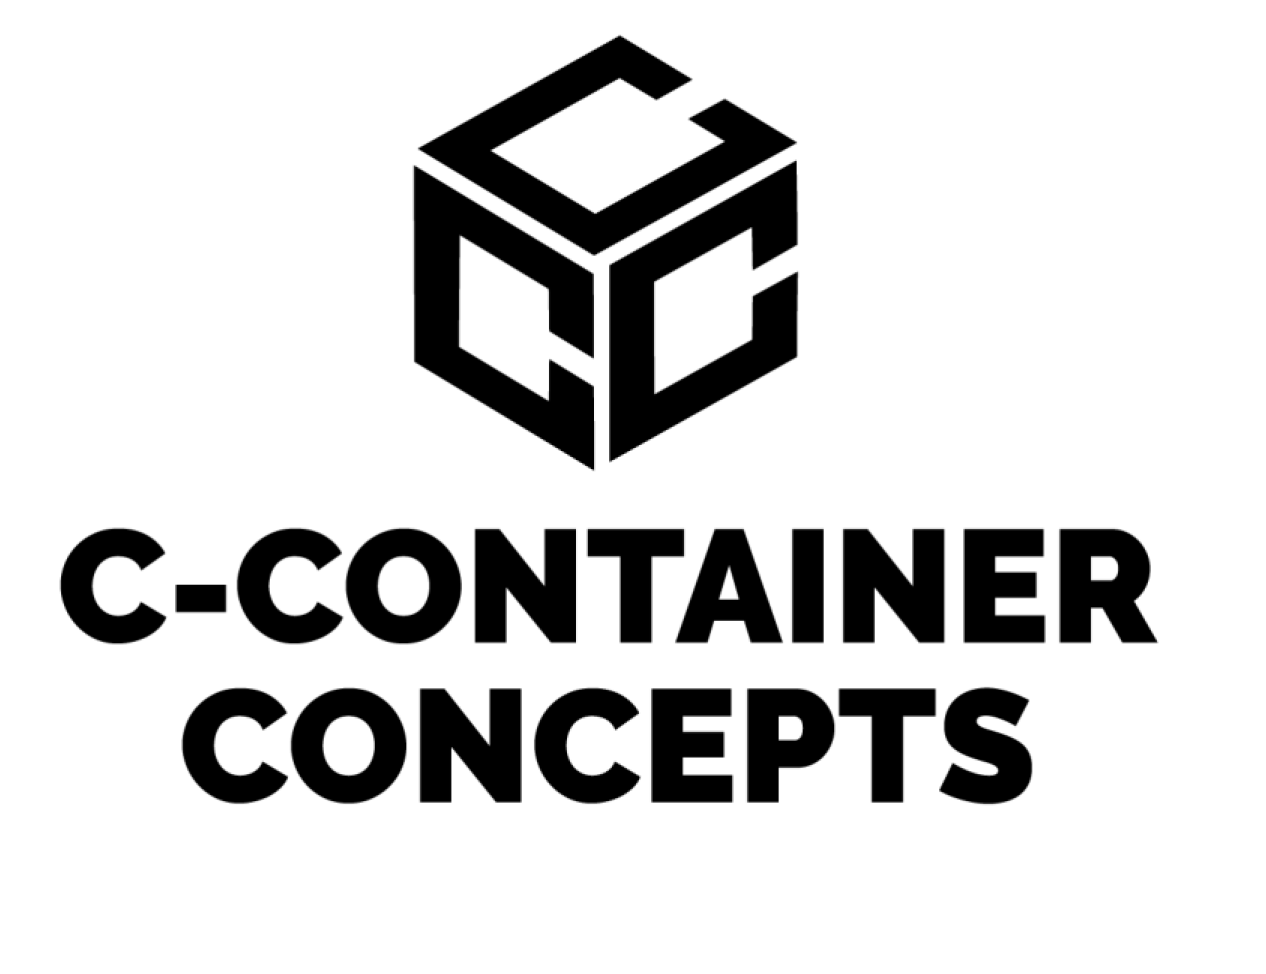 C-Container Concepts